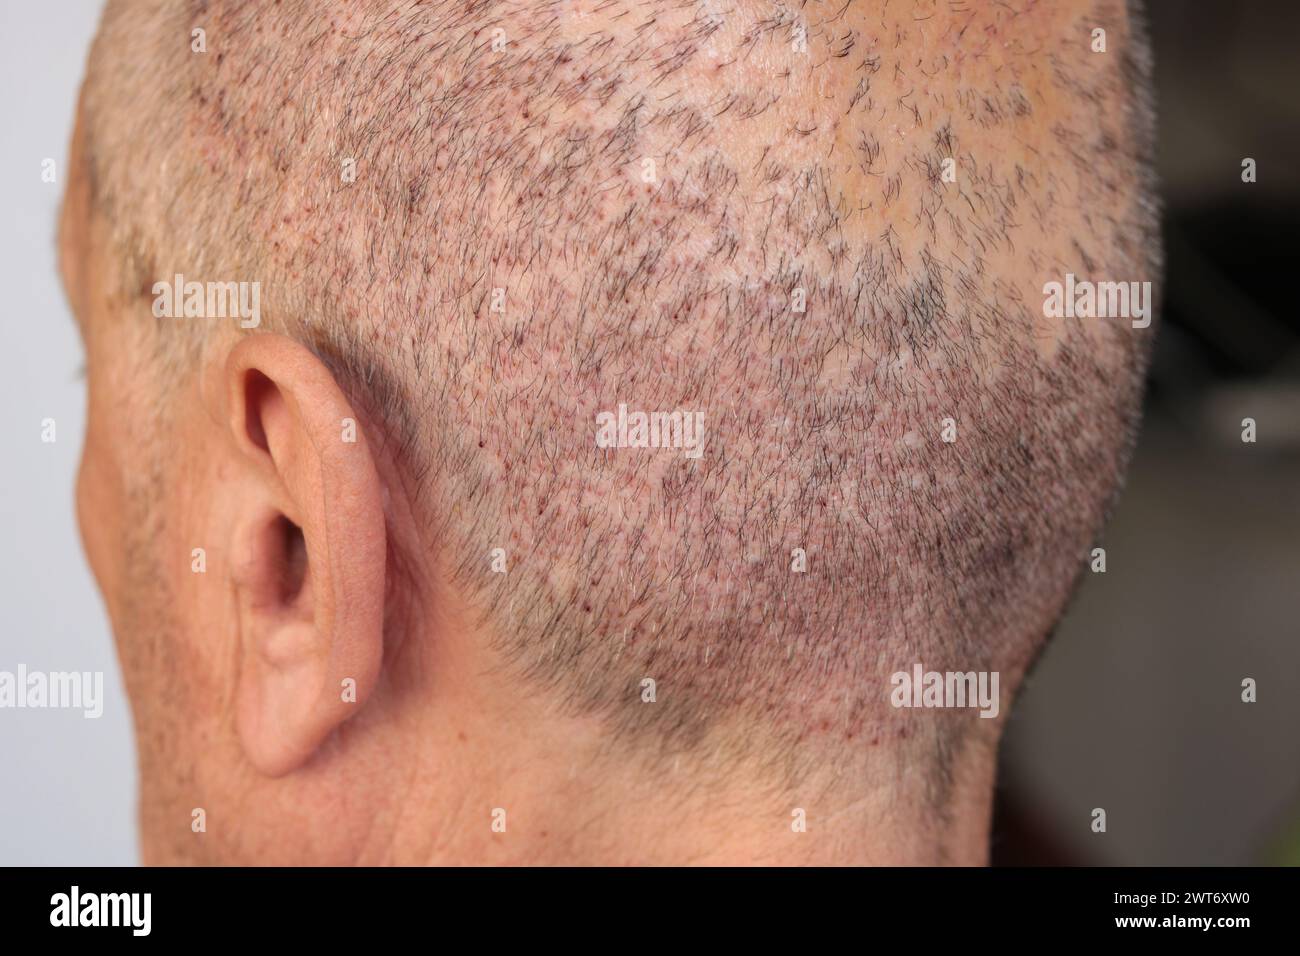 view of a man's head with hair transplant surgery area, one week after the transplant Stock Photo